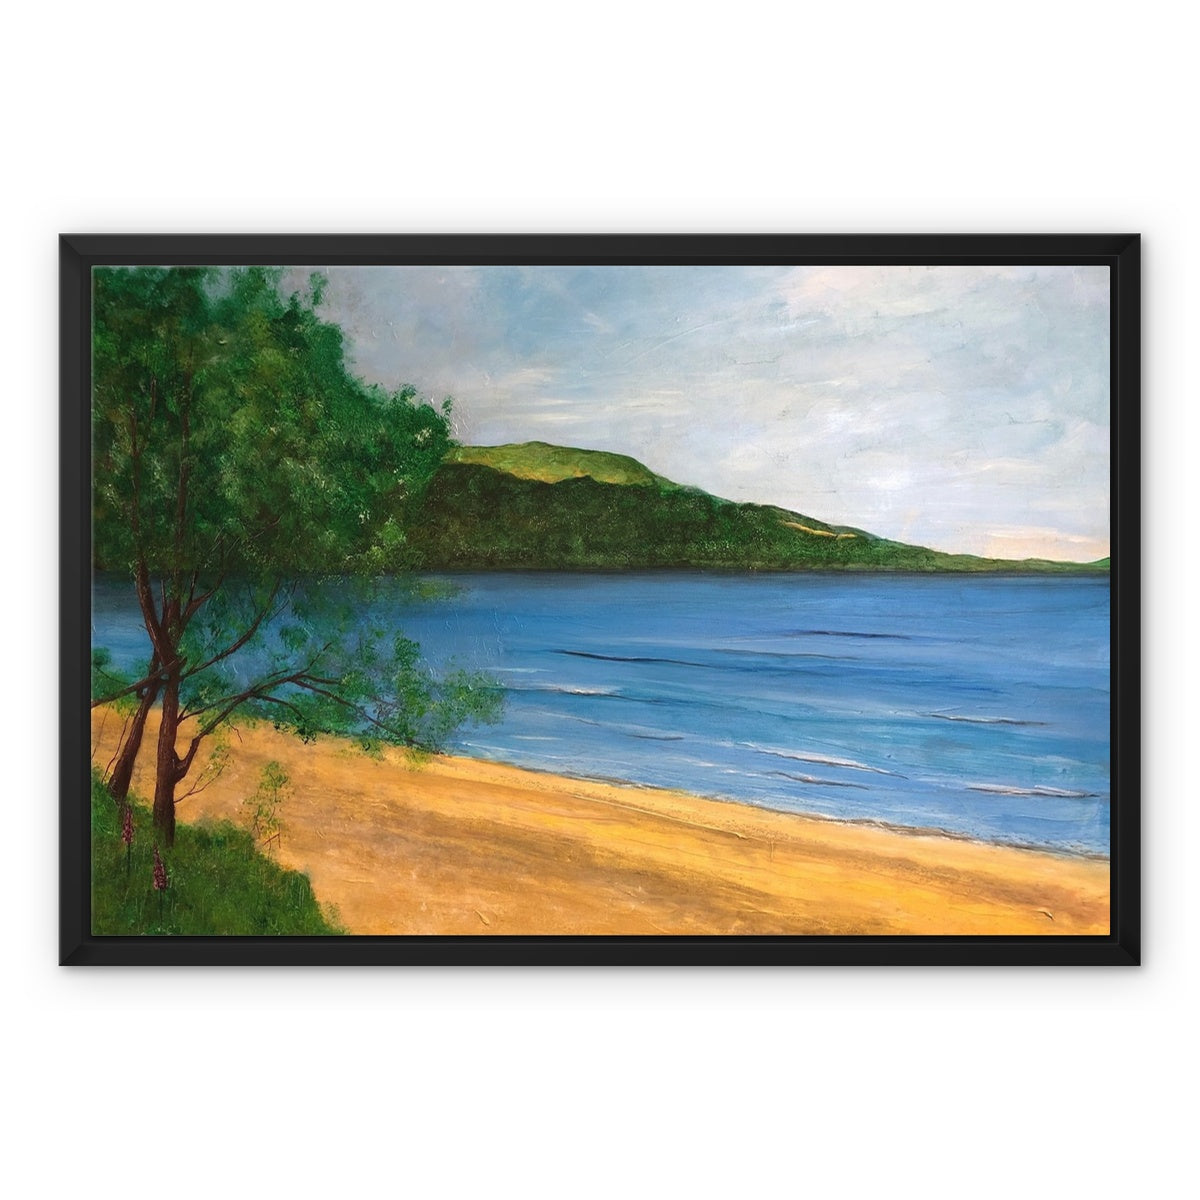 Loch Rannoch Painting | Framed Canvas-Floating Framed Canvas Prints-Scottish Lochs & Mountains Art Gallery-24"x18"-Black Frame-Paintings, Prints, Homeware, Art Gifts From Scotland By Scottish Artist Kevin Hunter